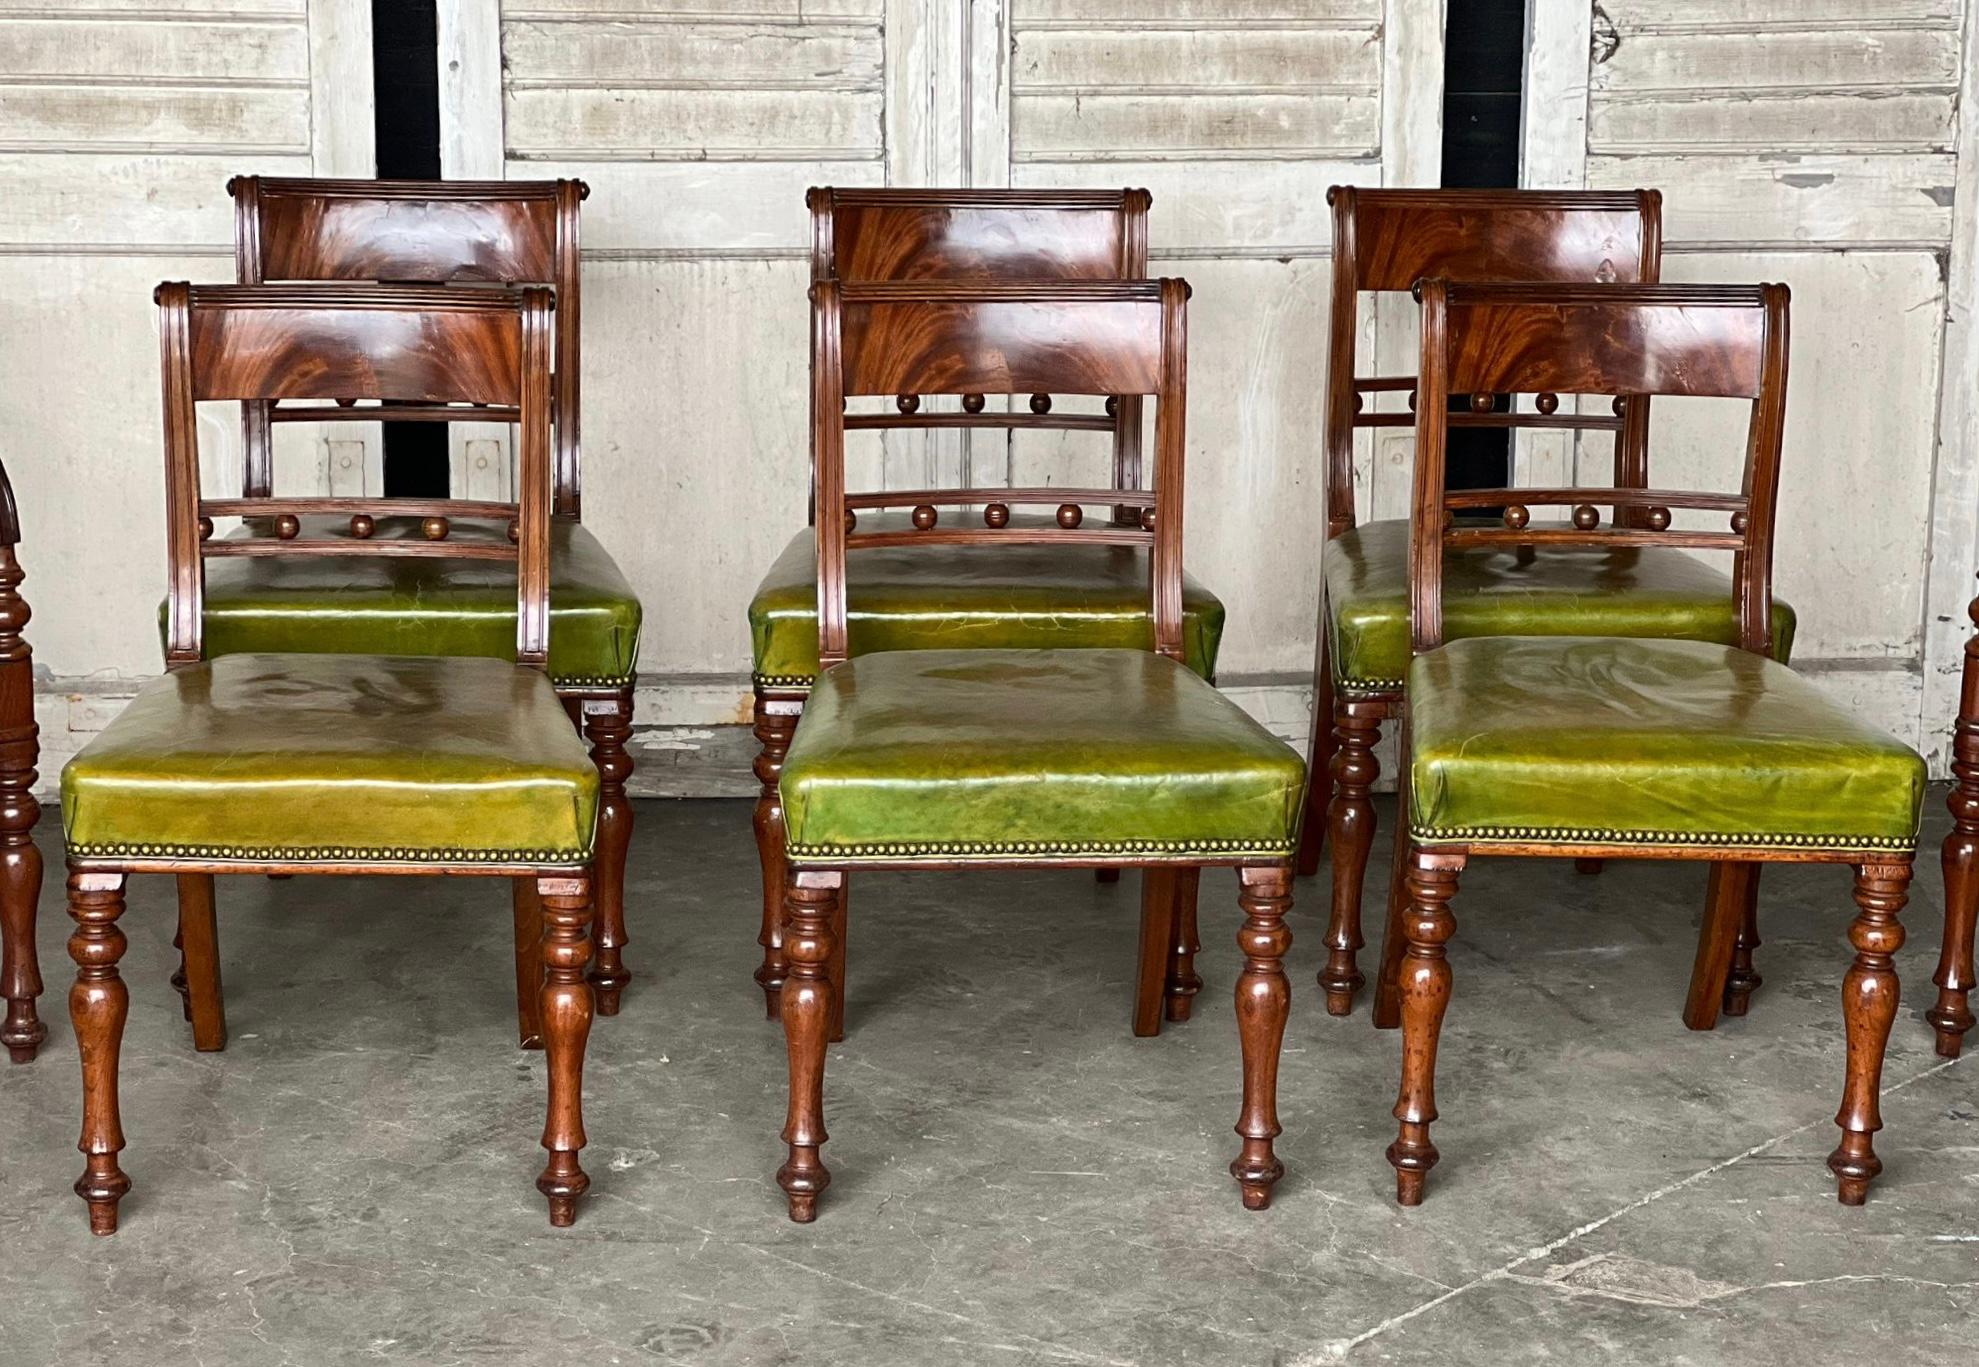 A magnificent set of 8 (6x2) Mahogany early 19th century dining chairs. The chairs are strong and sturdy and have lovely leather seats which have a nice patina. In overall excellent original condition for the home.
Measures: Arms:
Height 81